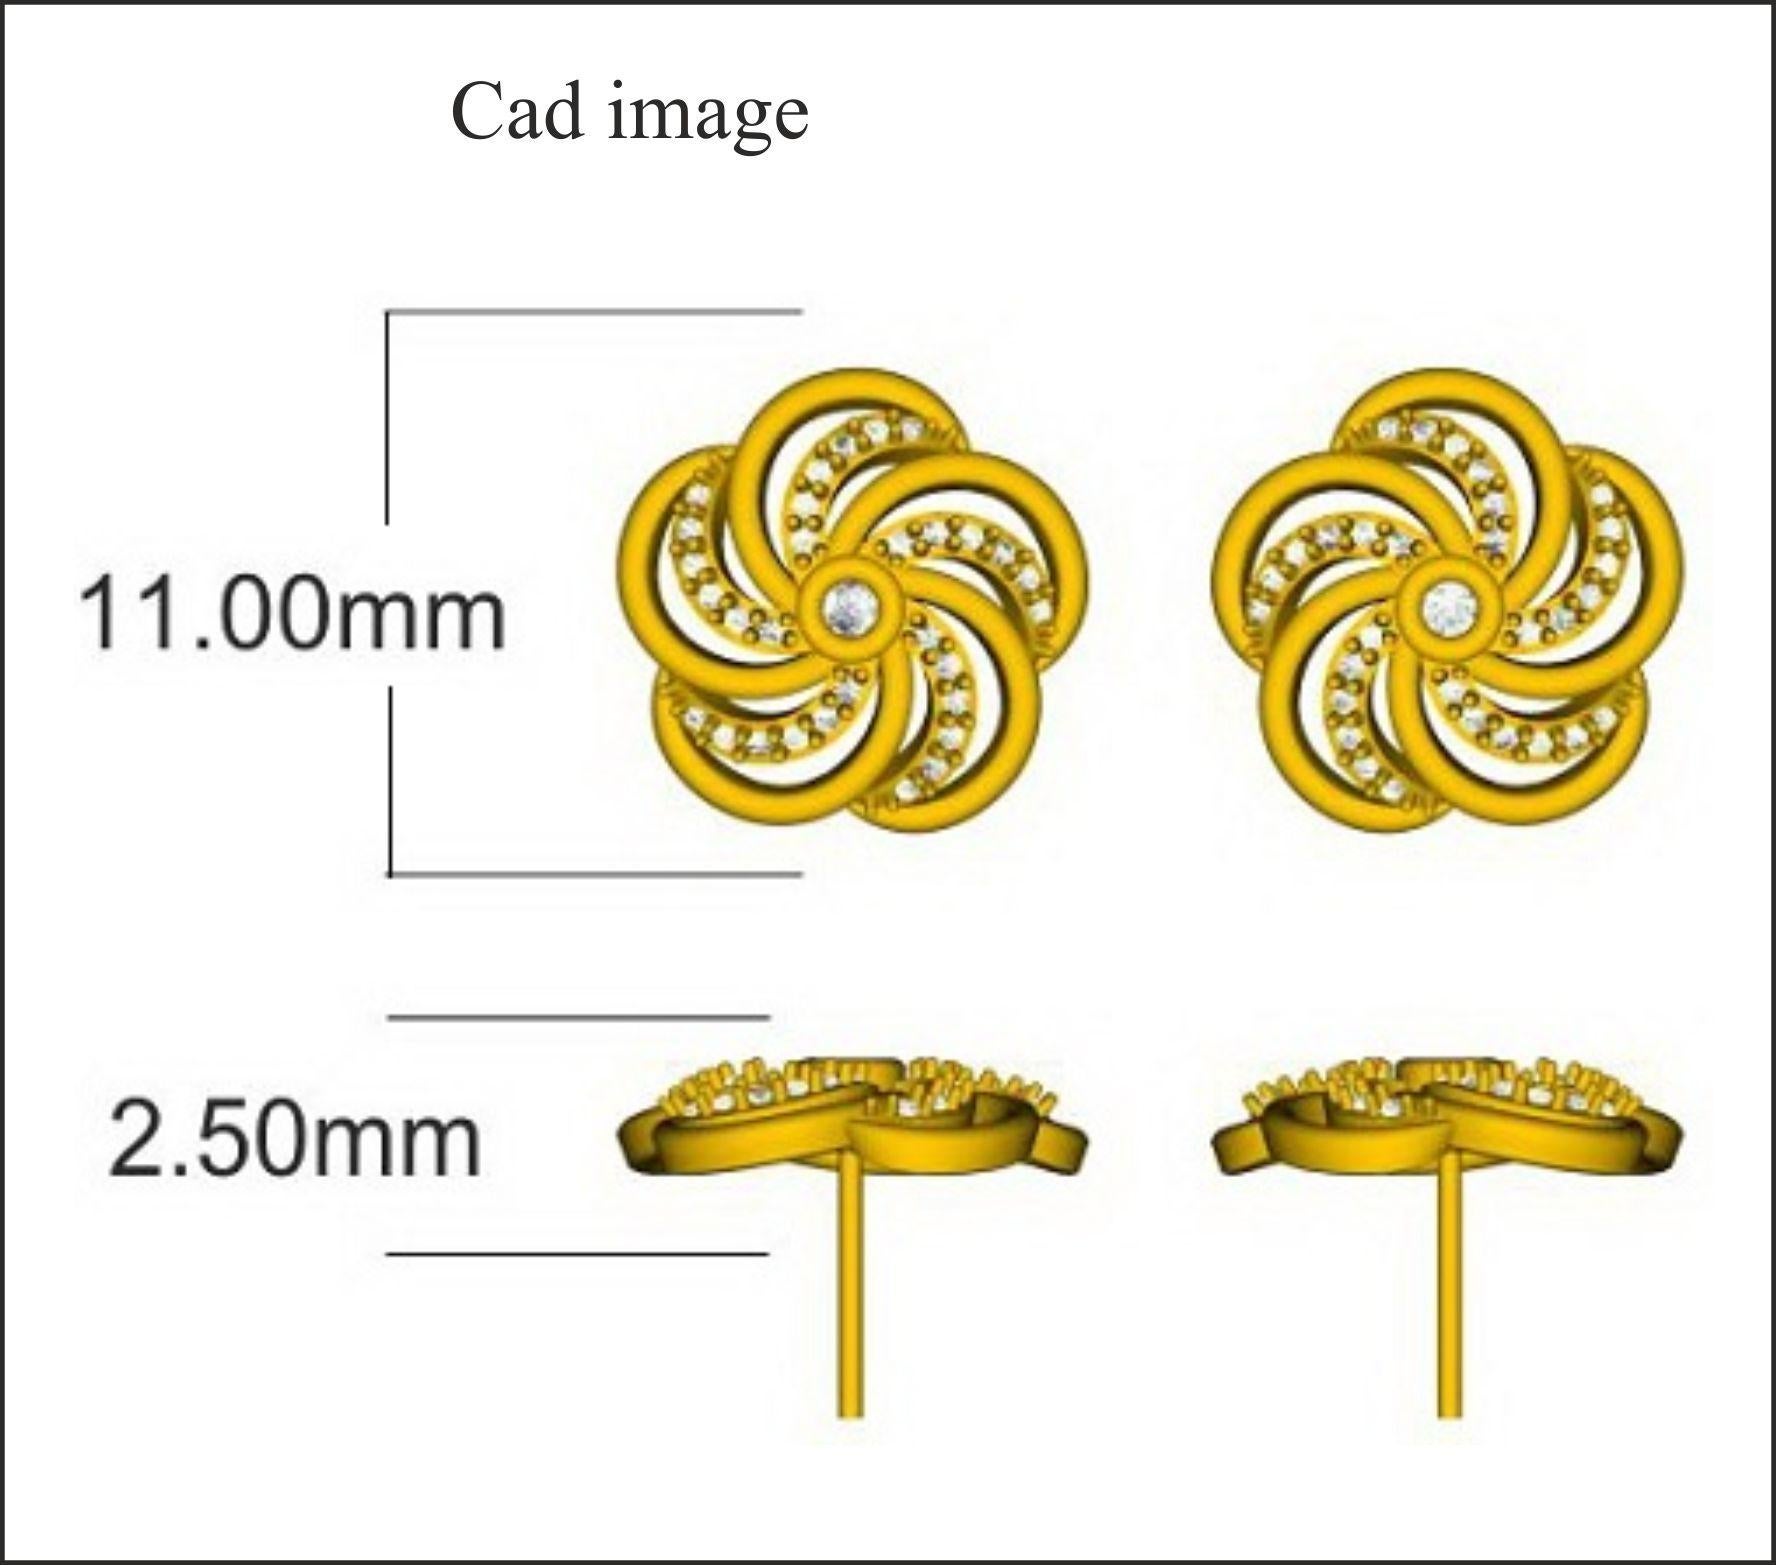 Bring charm to your look with this floral design stud earrings. The earrings is crafted from 14 karat yellow gold and features 62 round diamond set in prong and bezel setting and shines in H-I color I2 clarity. A high polish finish complete the